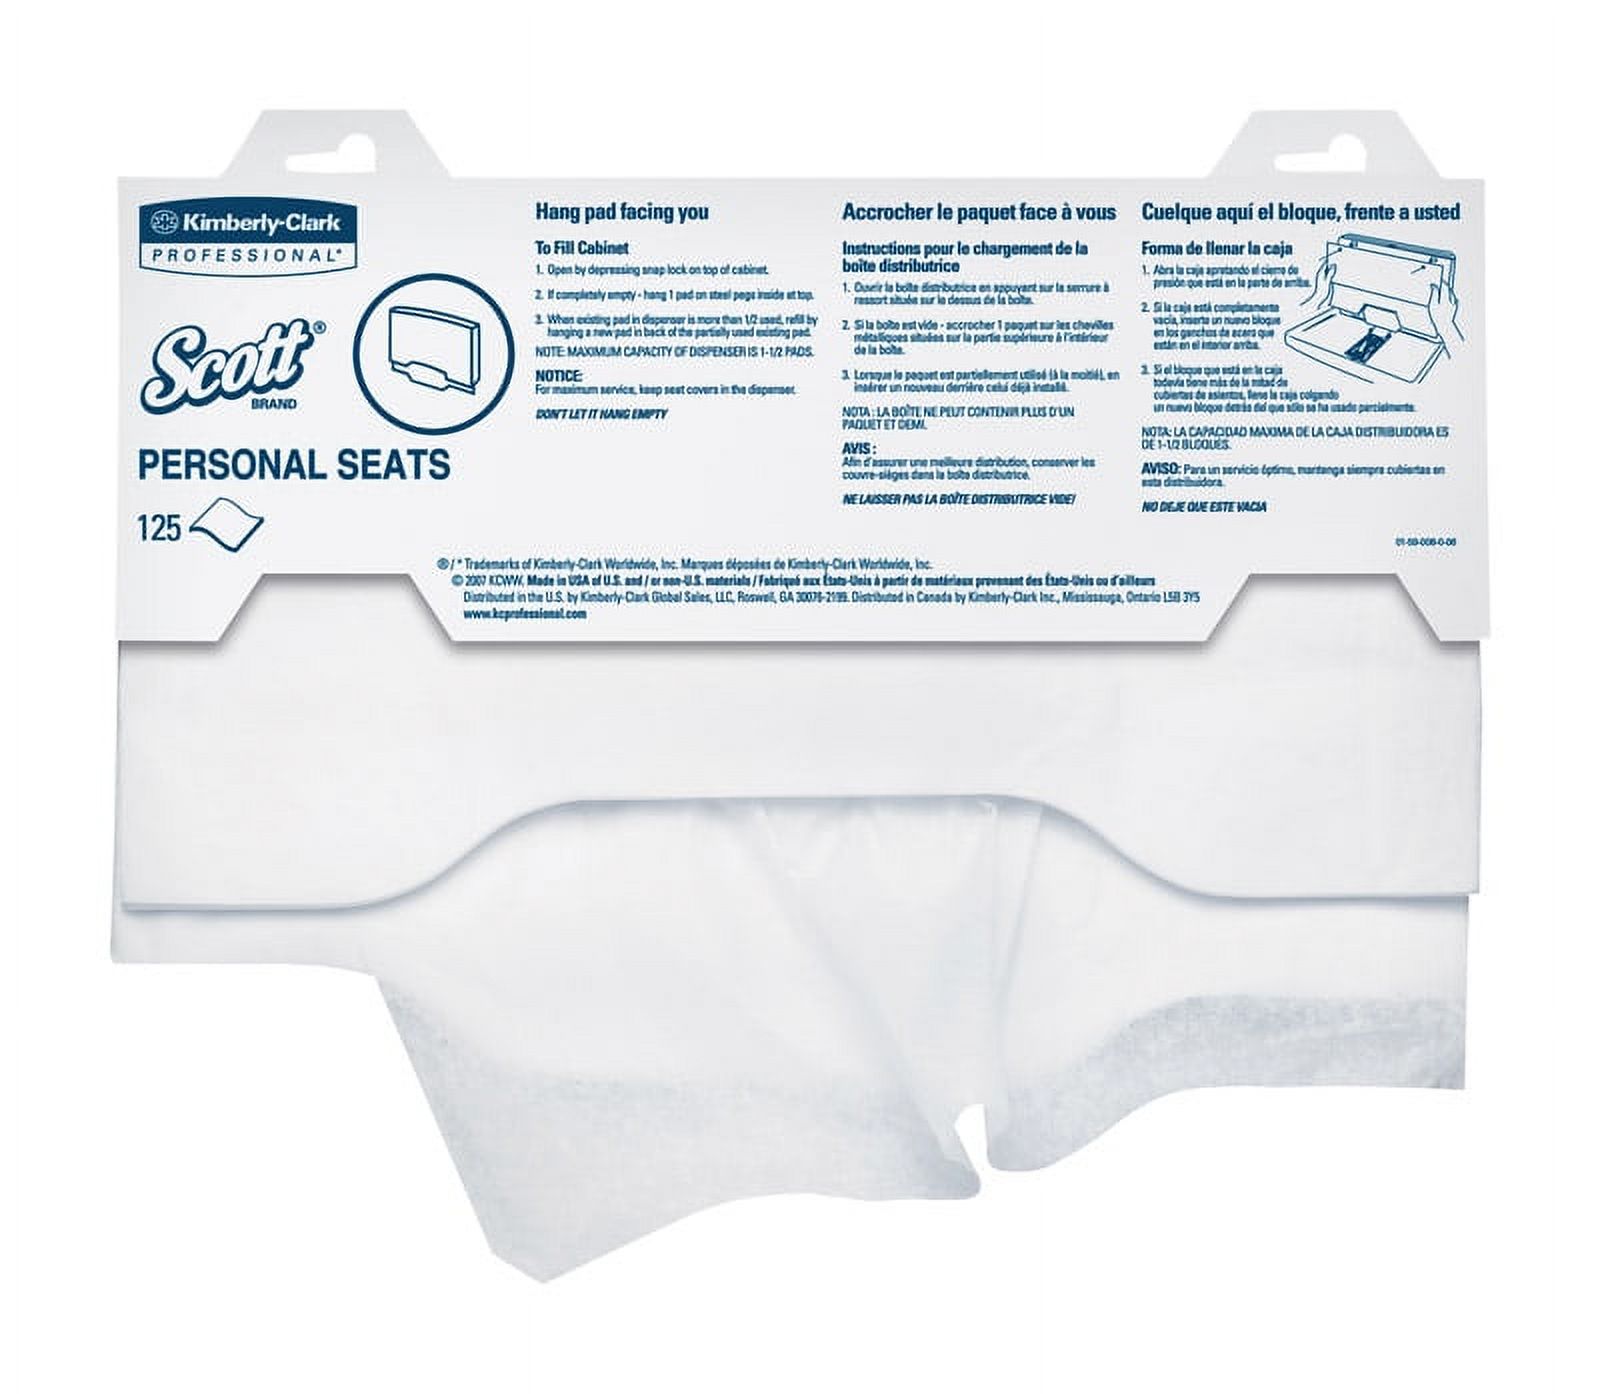 Scott Pro Personal Seat Covers - image 1 of 2